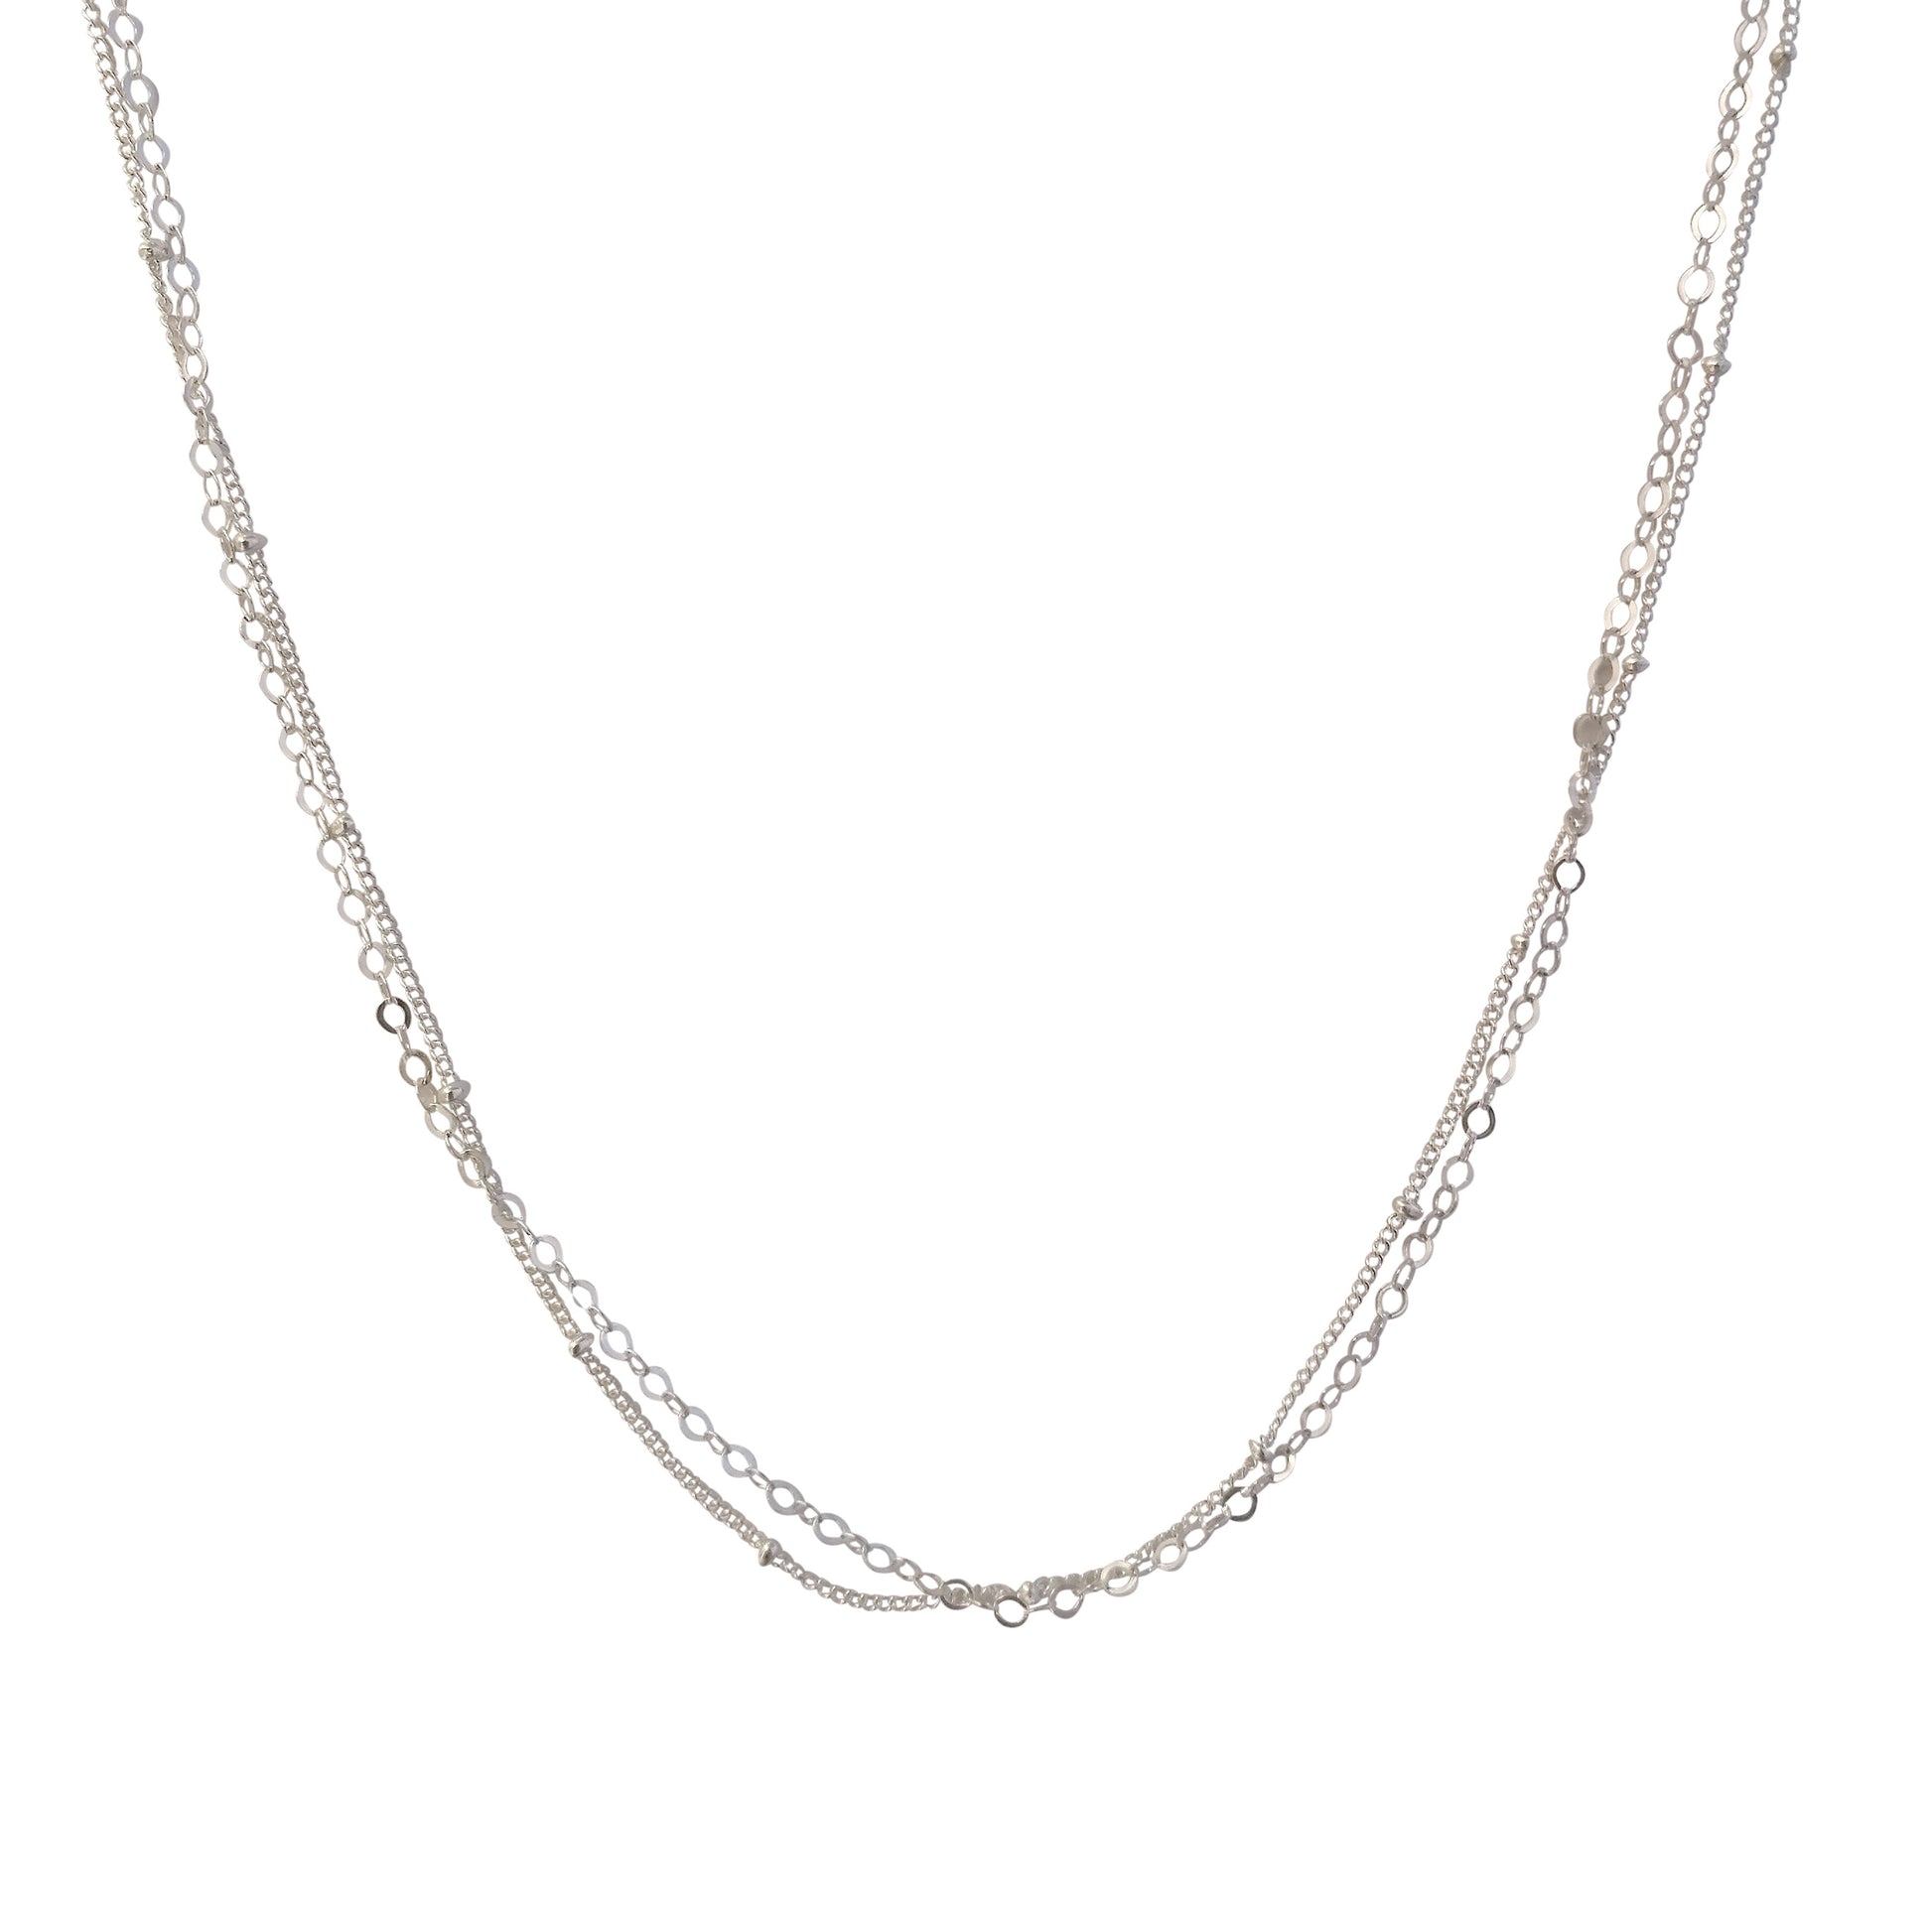 Dainty Silver Layered Chain necklace